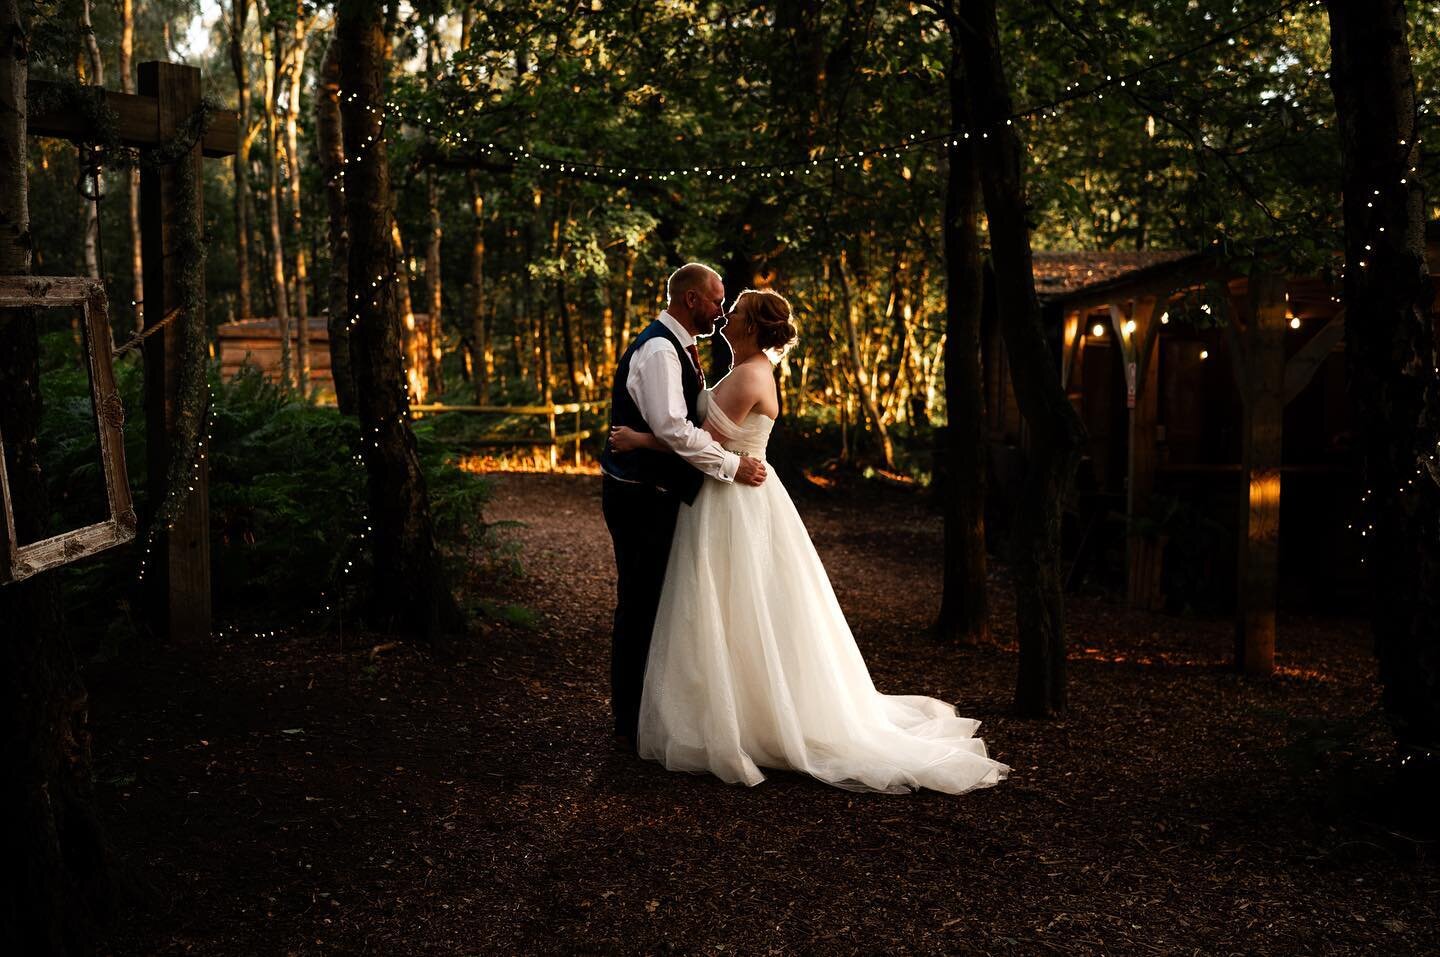 A wonderland woodland Wedding 🌲

So lucky to have photographed this beautiful family 🥰